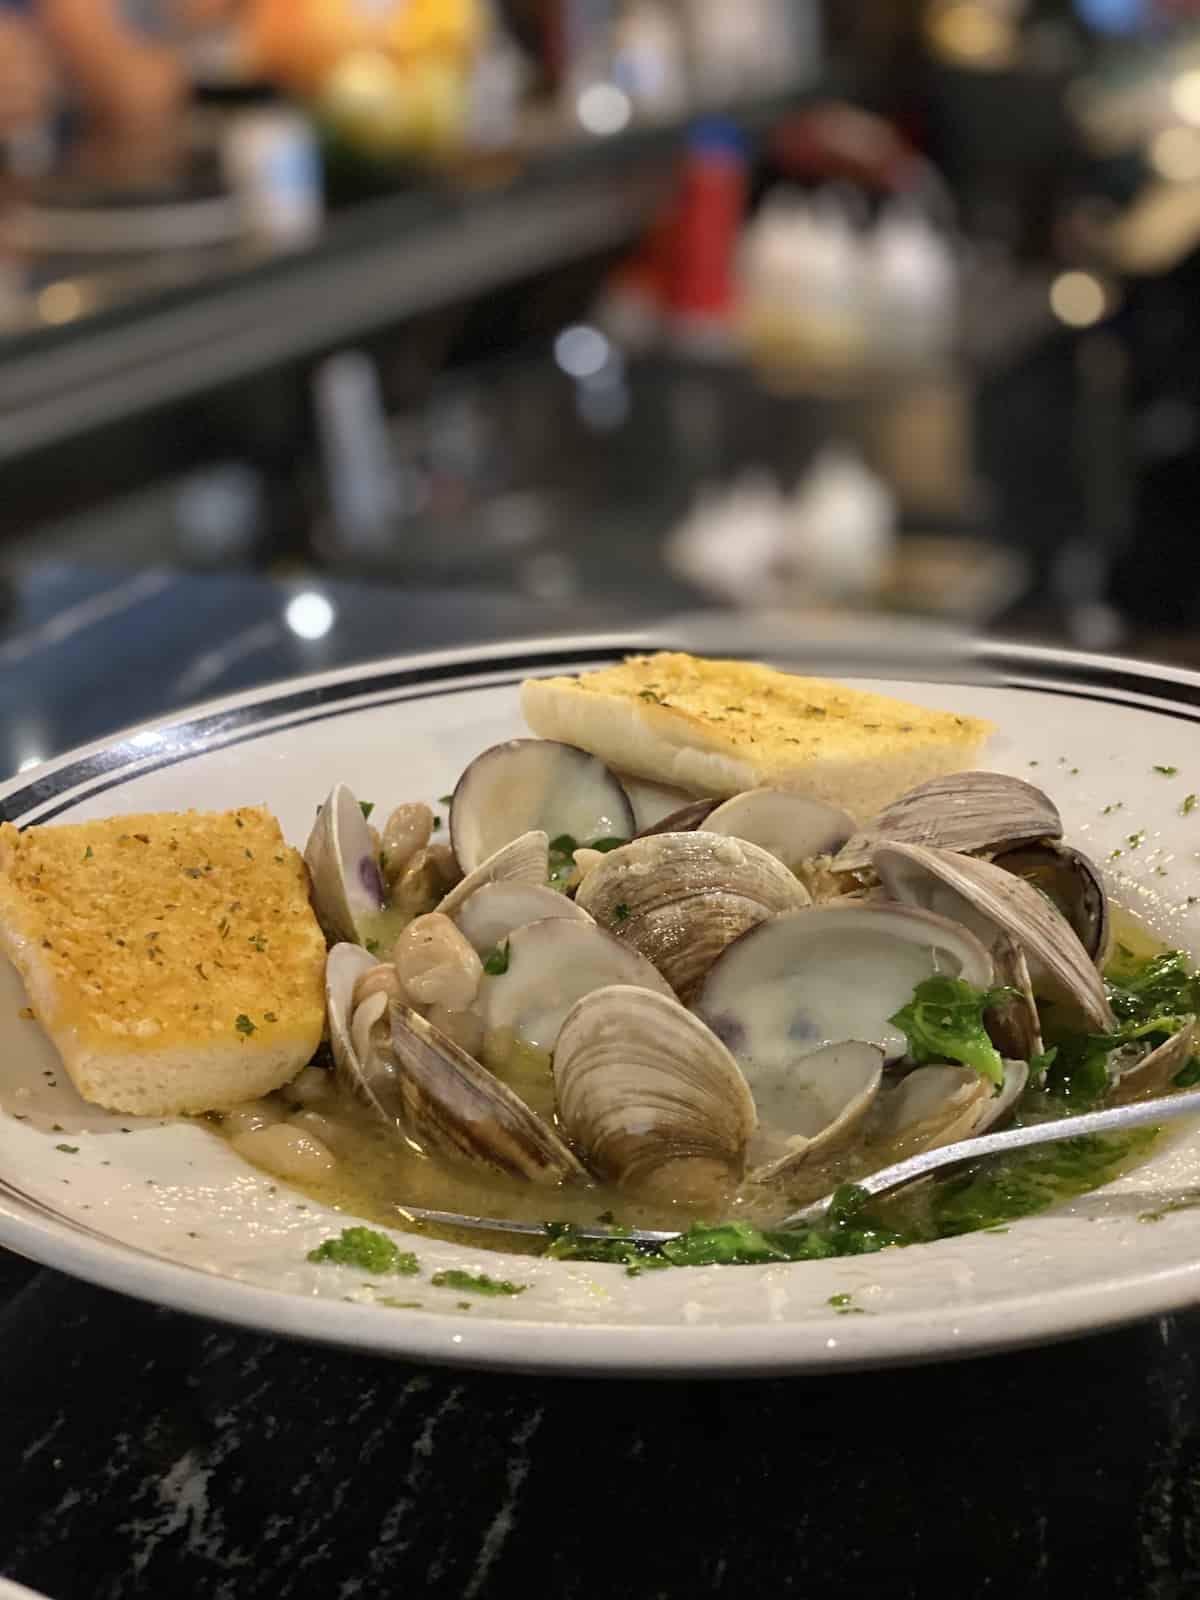 Clams, beans, and broccoli rabe in broth in a bowl with bread on side. 